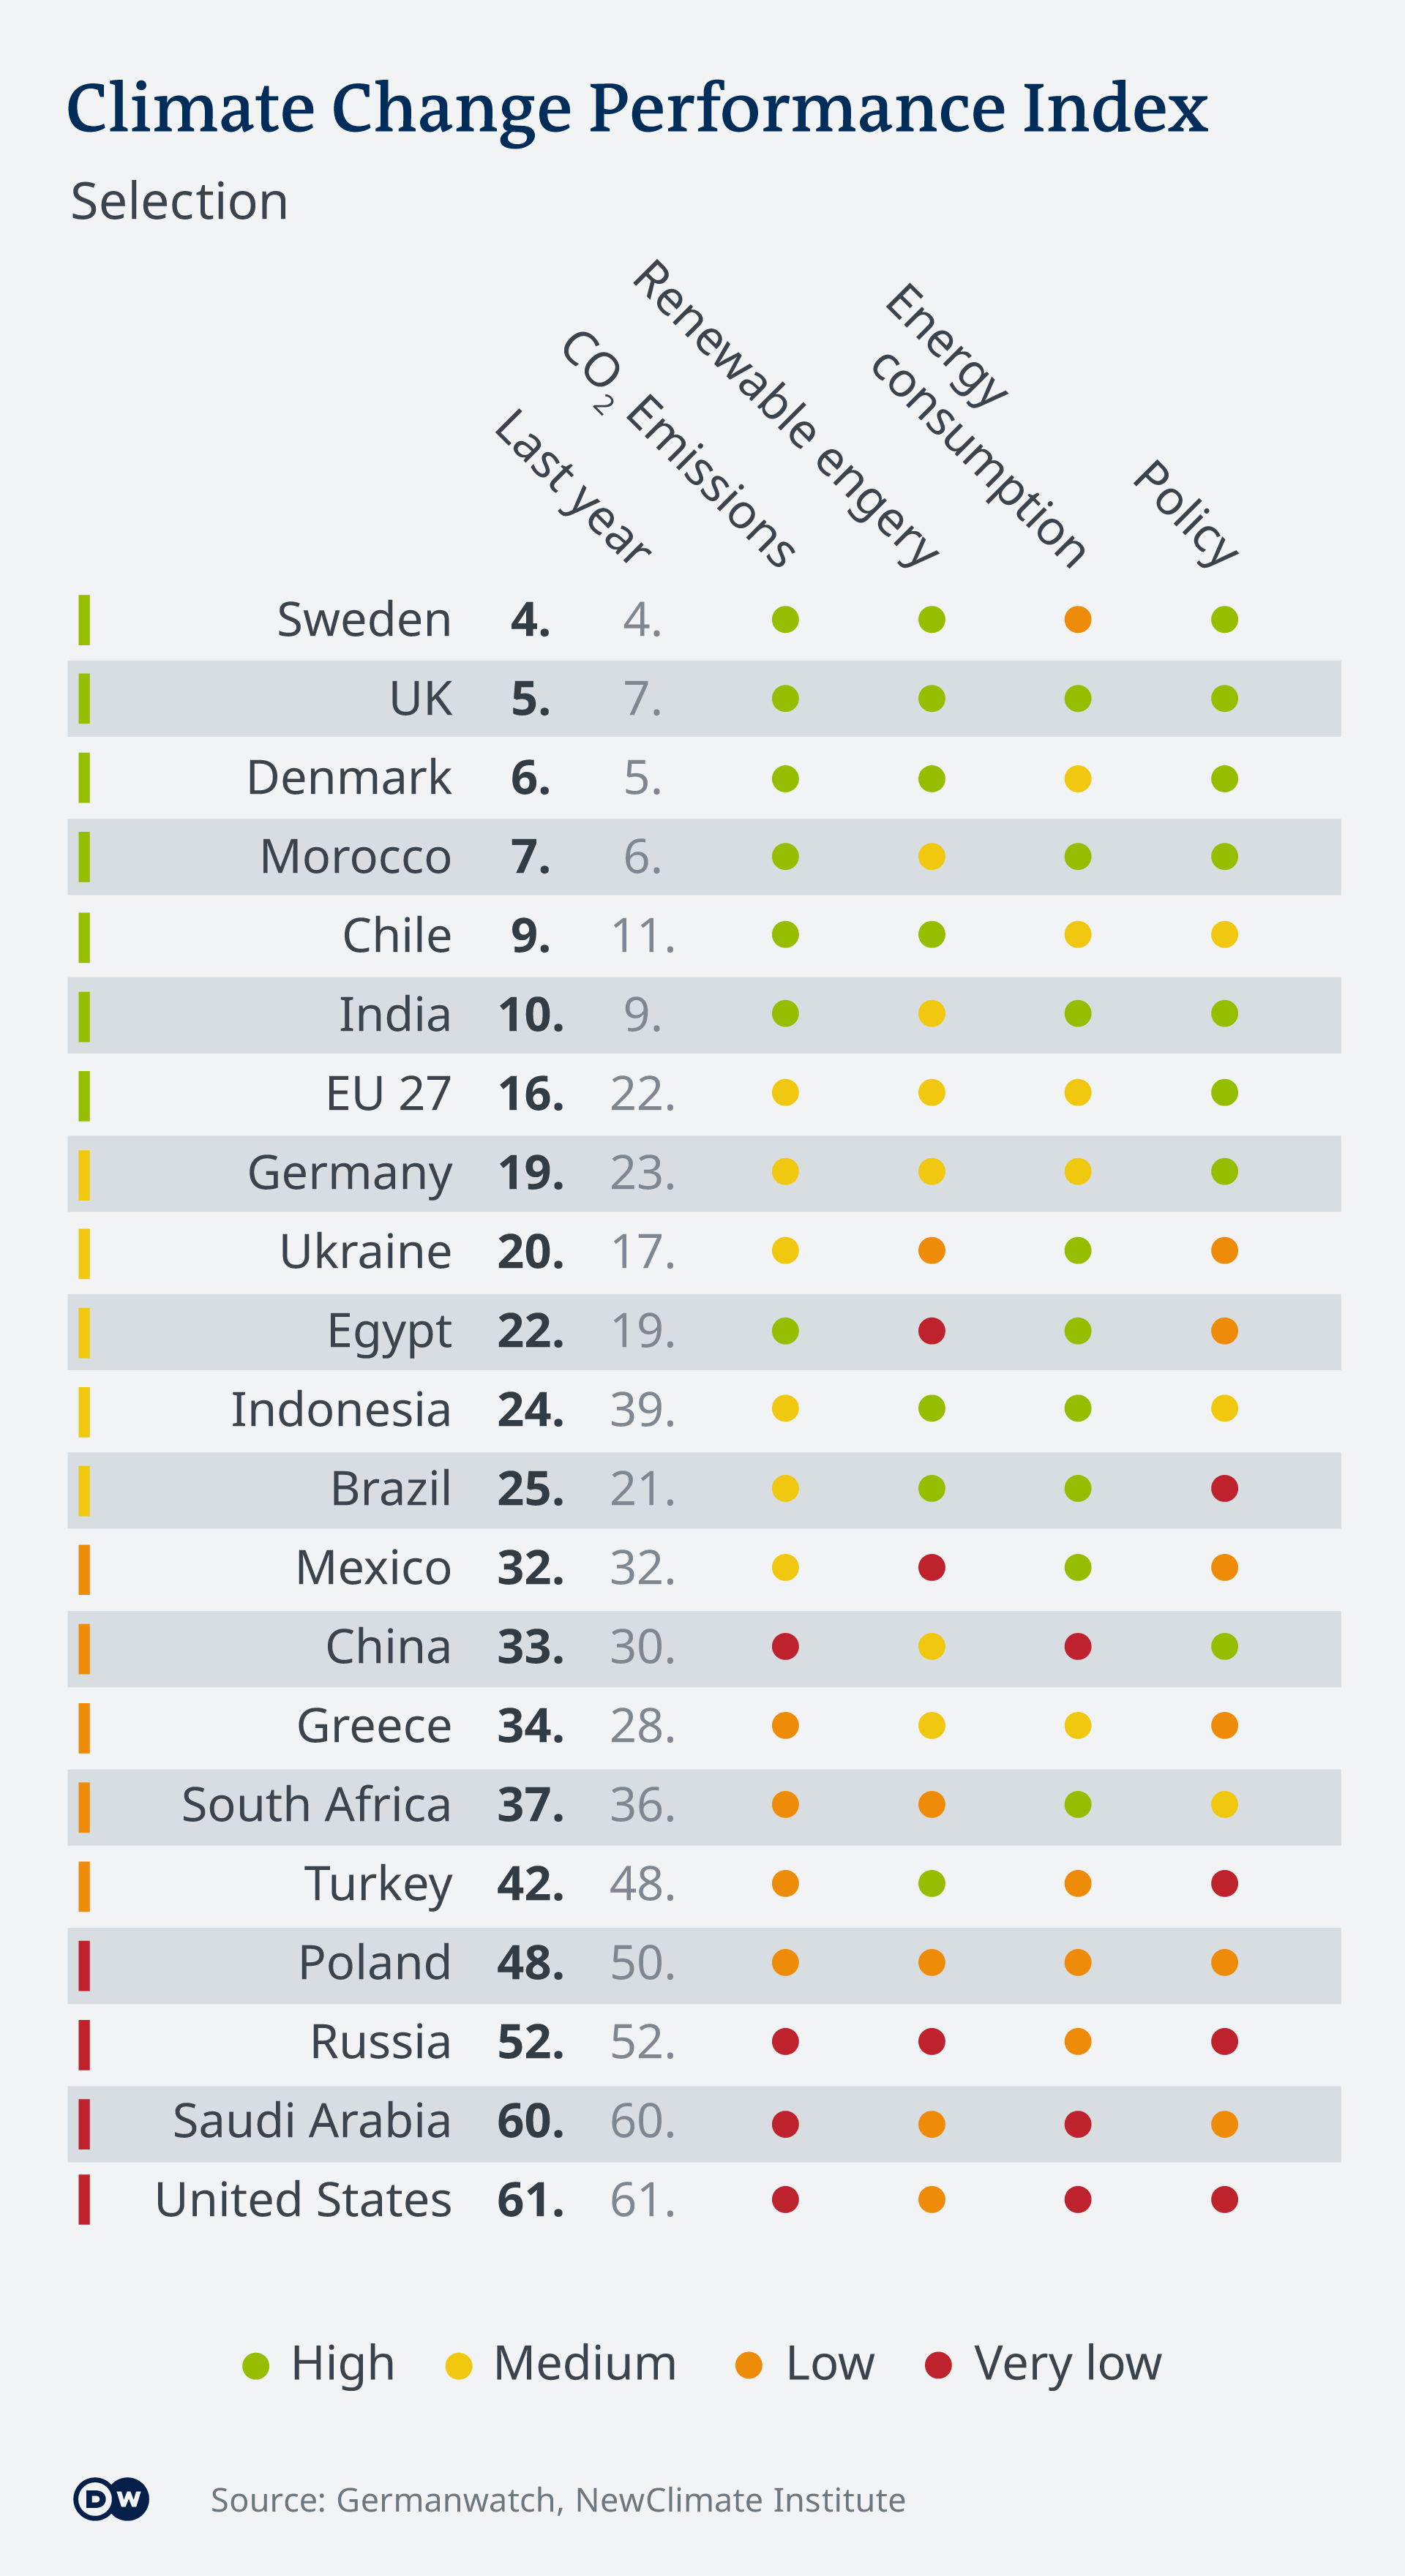 Ranking of countries in the index